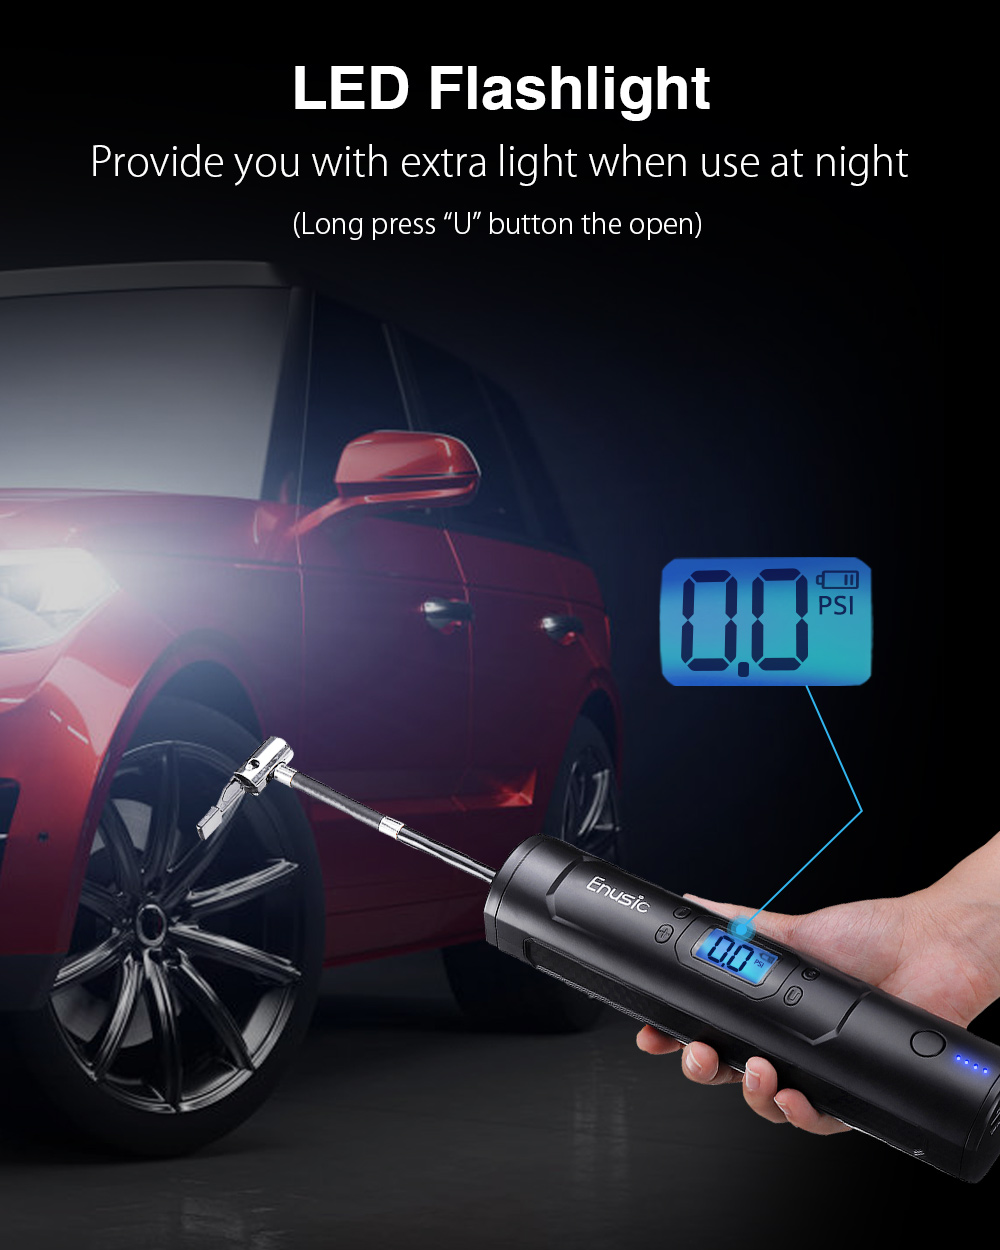 Enusic™ 7800mAh Cordless 25L/min 150PSI Portable Air Compressor Pump LED Power Bank Digital Tyre Inflator For Motorcycle Car Auto Bicycle